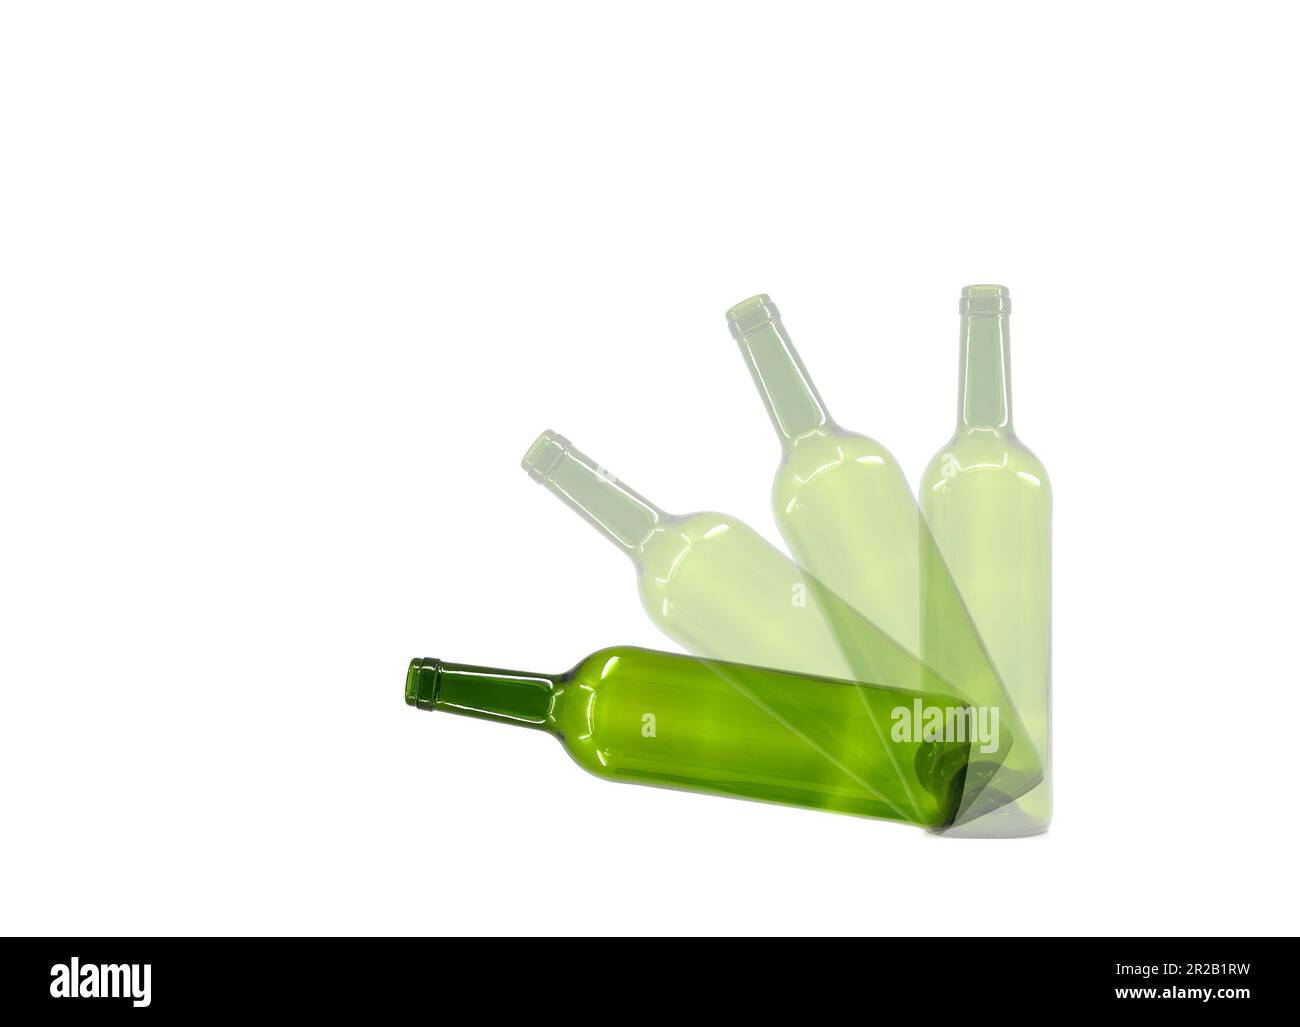 Empty wine bottle multiple exposure to create falling motion effect isolated on a plain white background. Copy space. Stock Photo